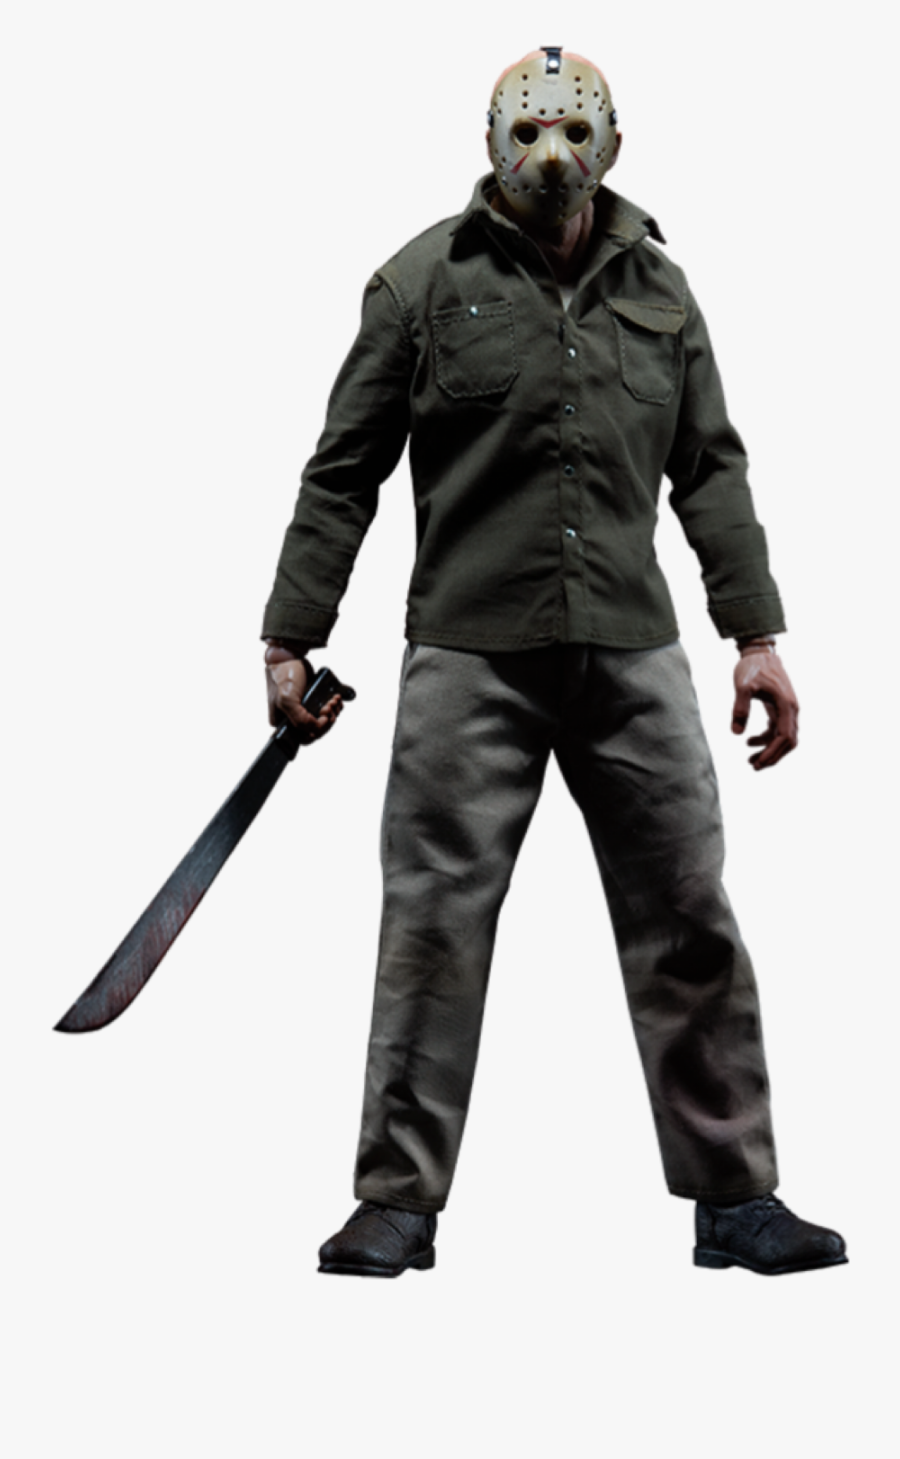 Jason Friday 13 Png Clipart , Png Download - Jason Friday 13 Png, Transparent Clipart